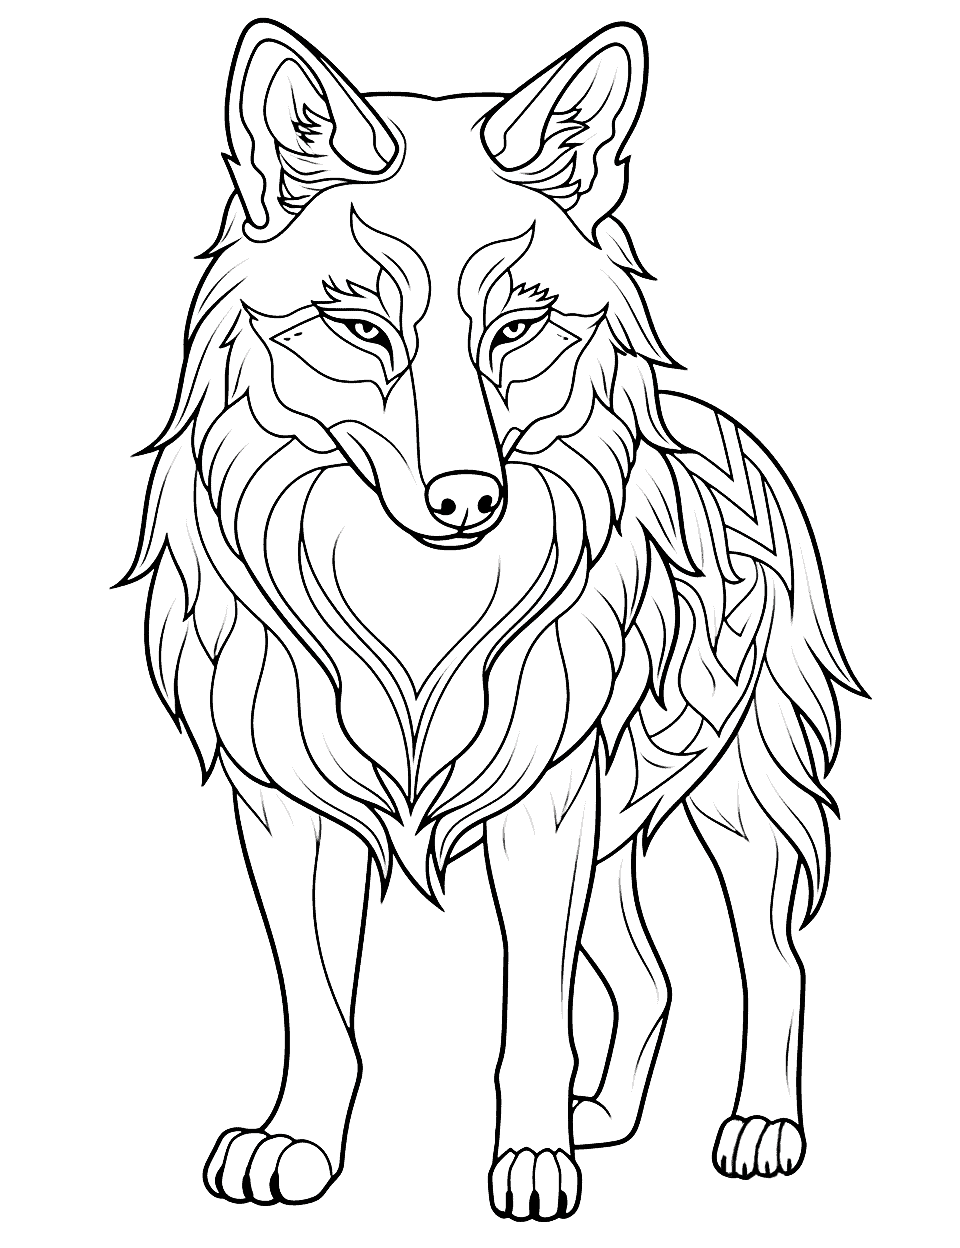 Creative Wolf Drawing Coloring Page - A mix of geometric and freeform lines to create a unique wolf design.